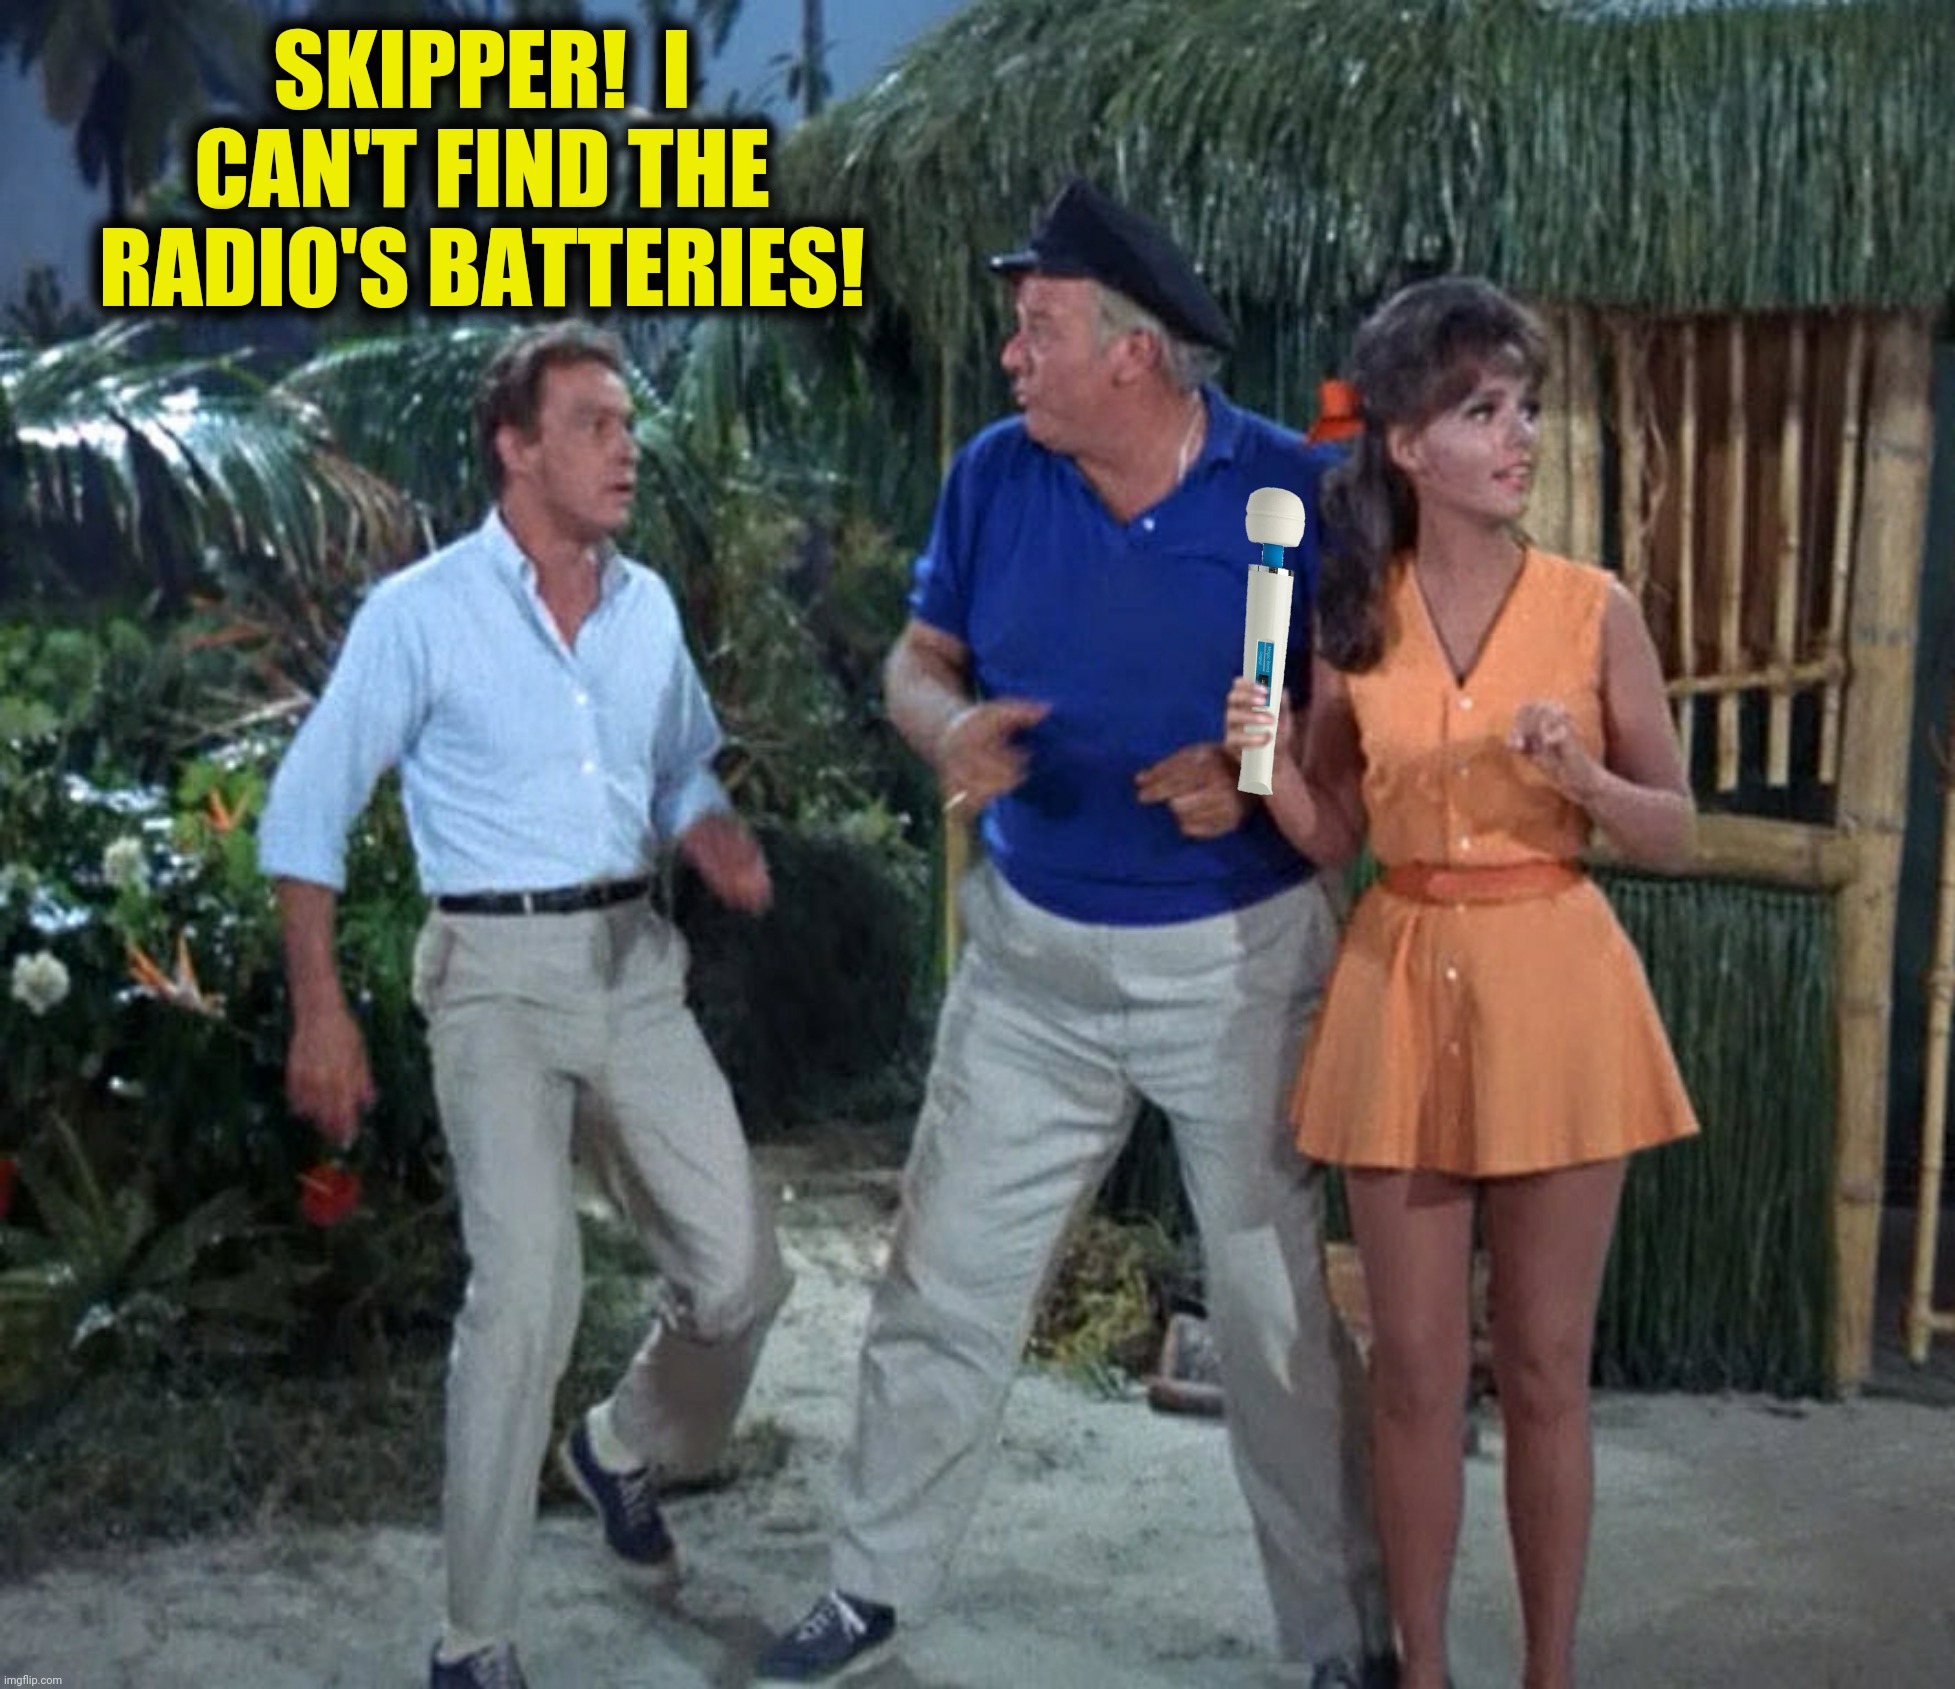 SKIPPER!  I CAN'T FIND THE RADIO'S BATTERIES! | made w/ Imgflip meme maker